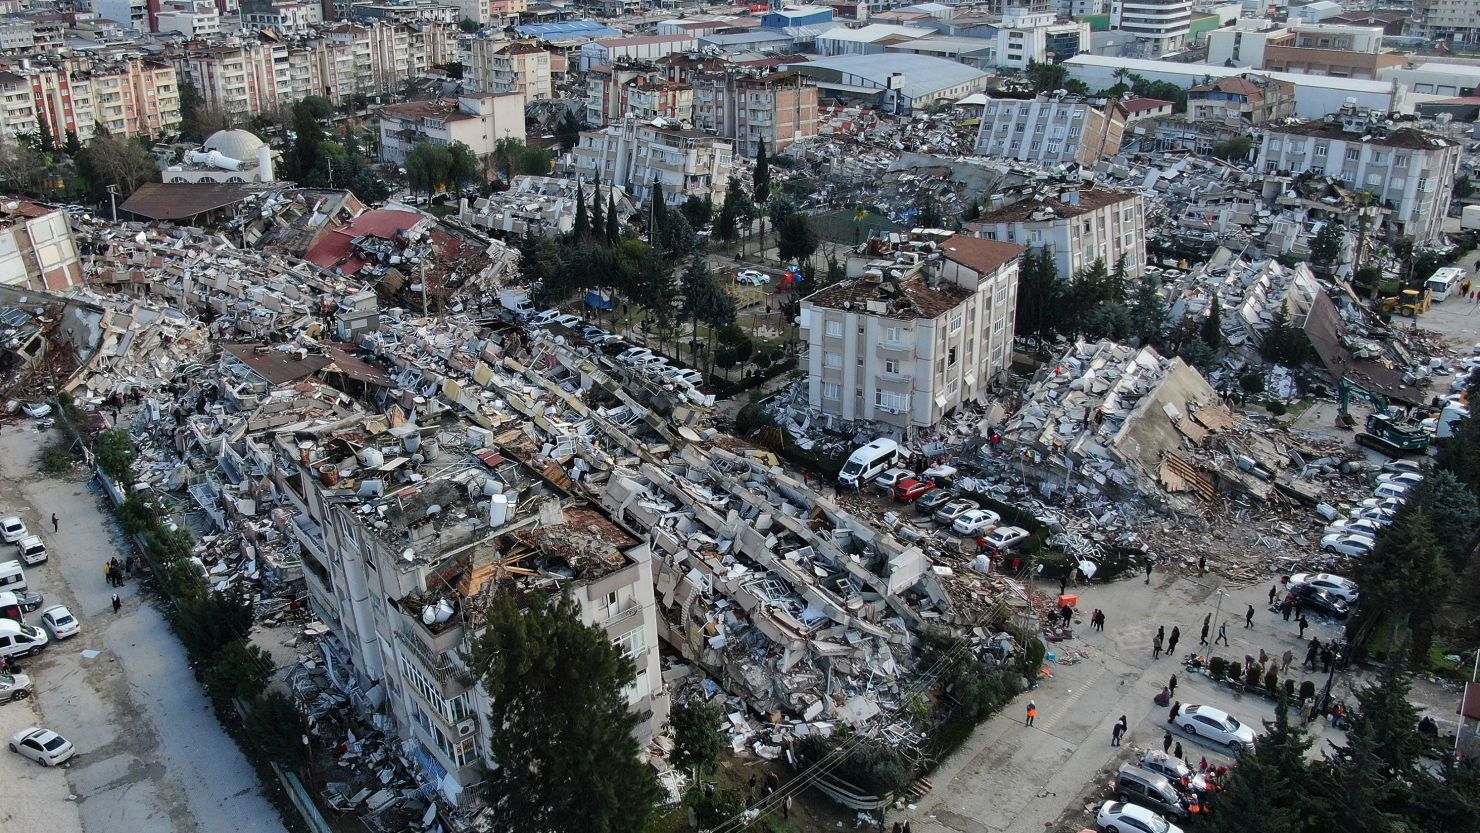 The city of Hatay, southern Turkey, suffered major destruction from the earthquake.  